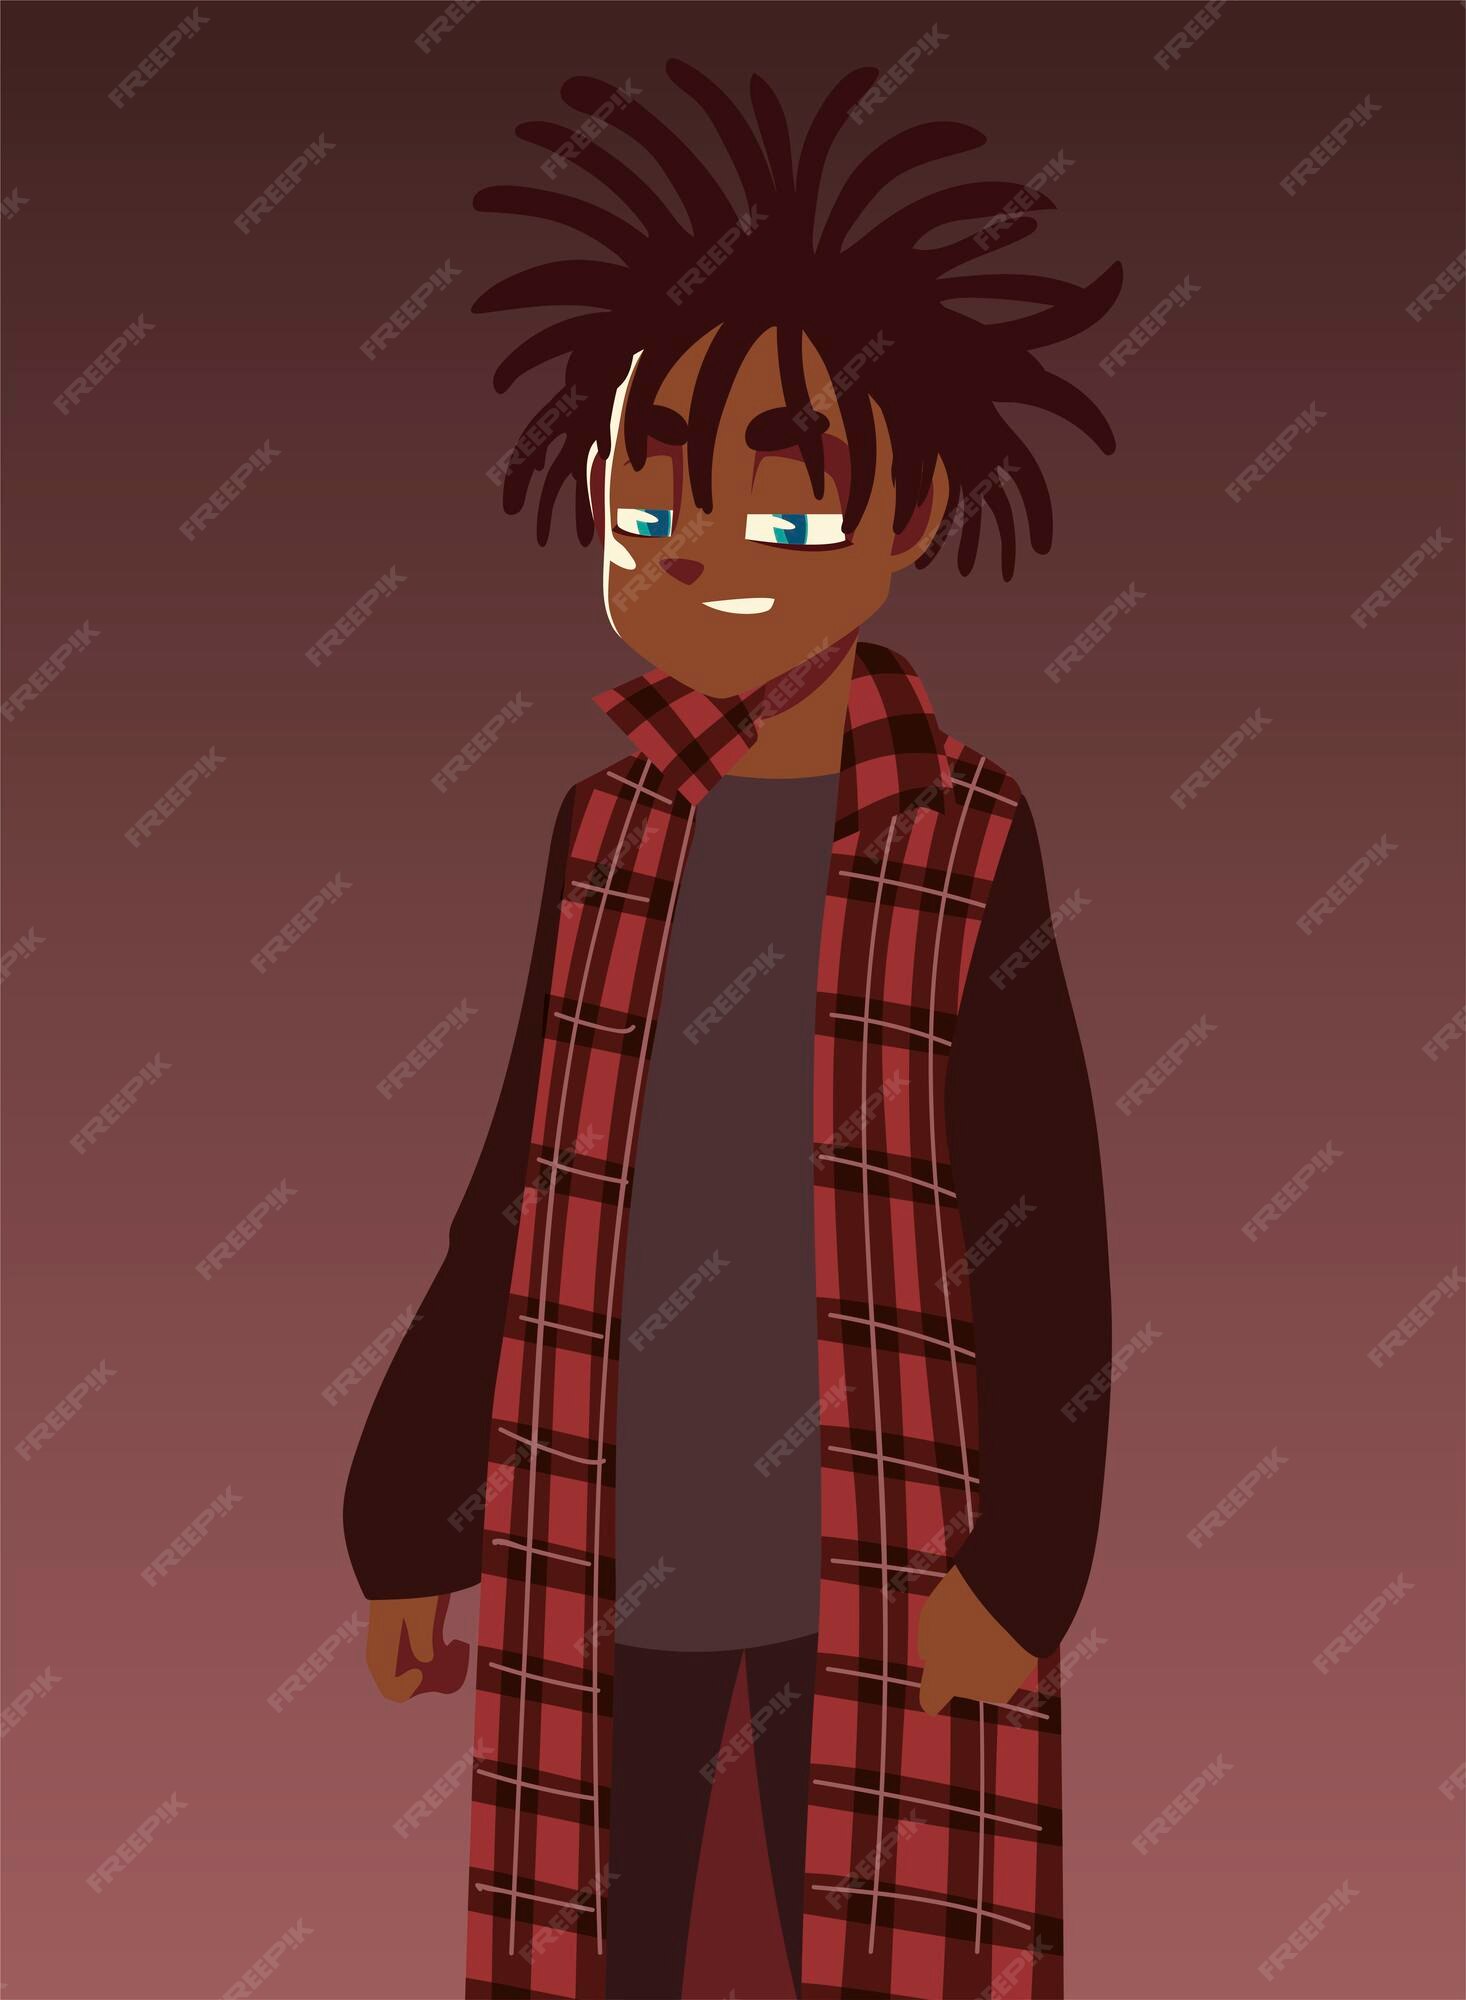 Premium Vector | Boy with long dreadlocks fashionable clothes, young ...